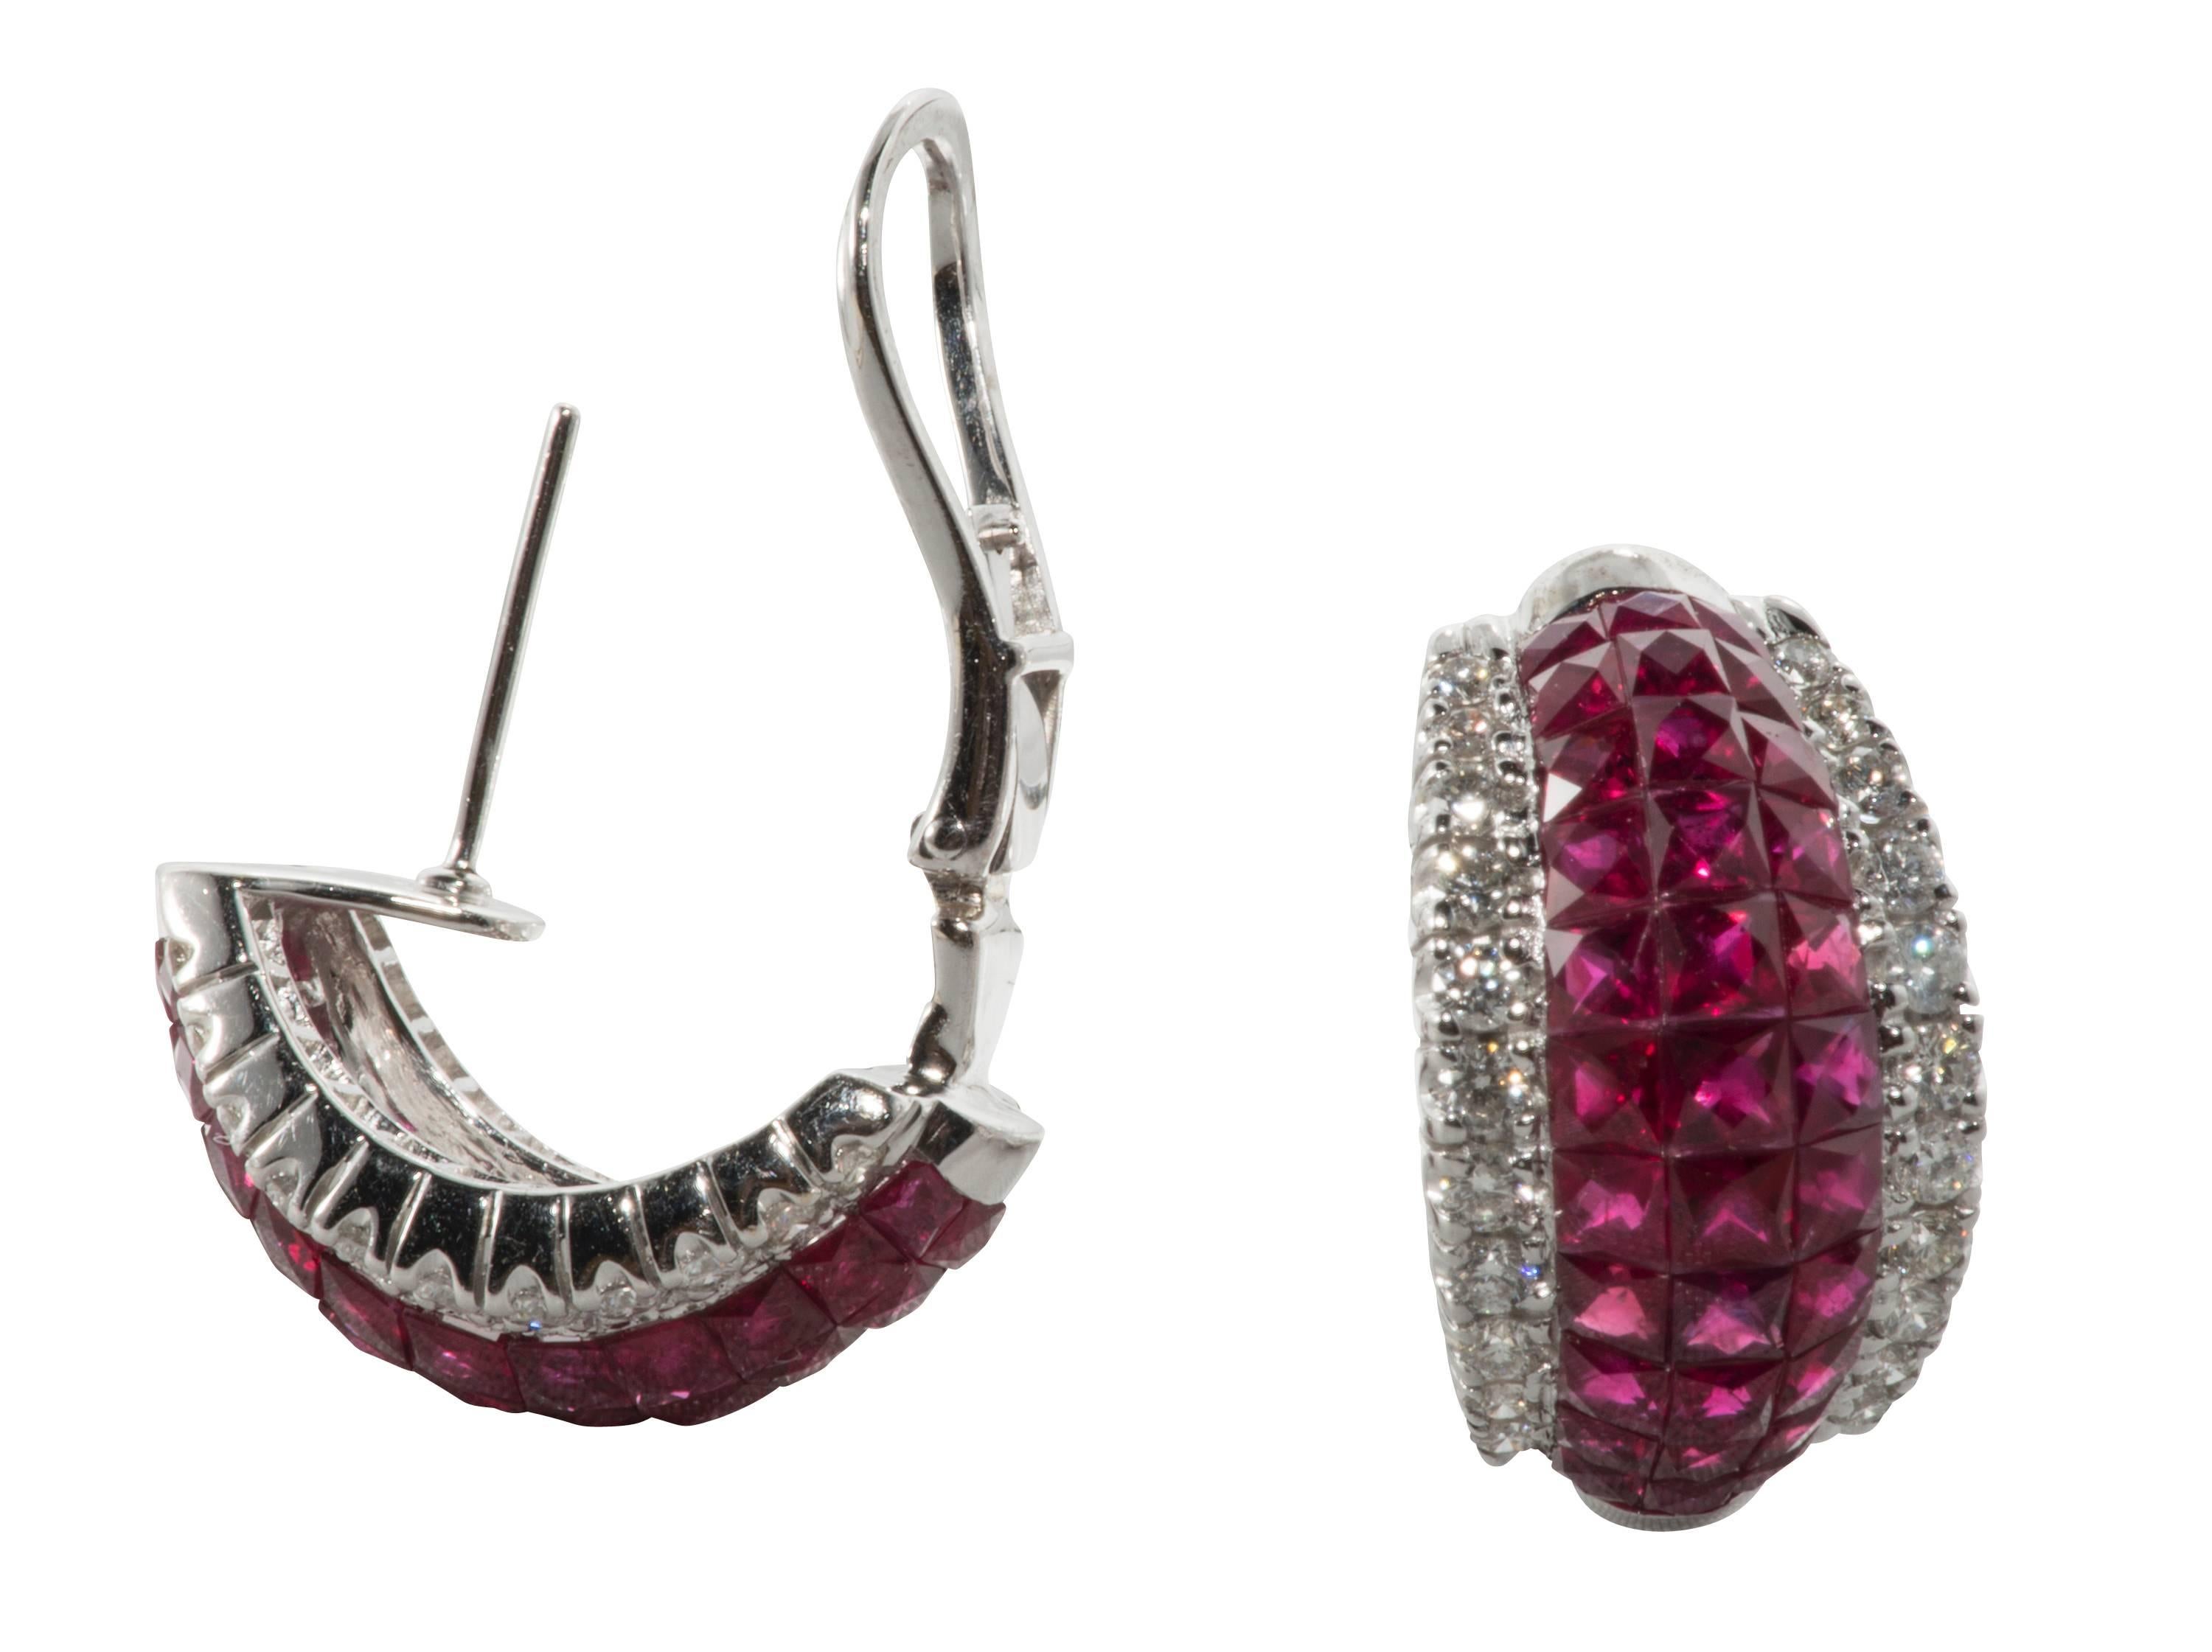 These are beautiful Burmese ruby and diamond earrings invisibly set in 18k white gold.